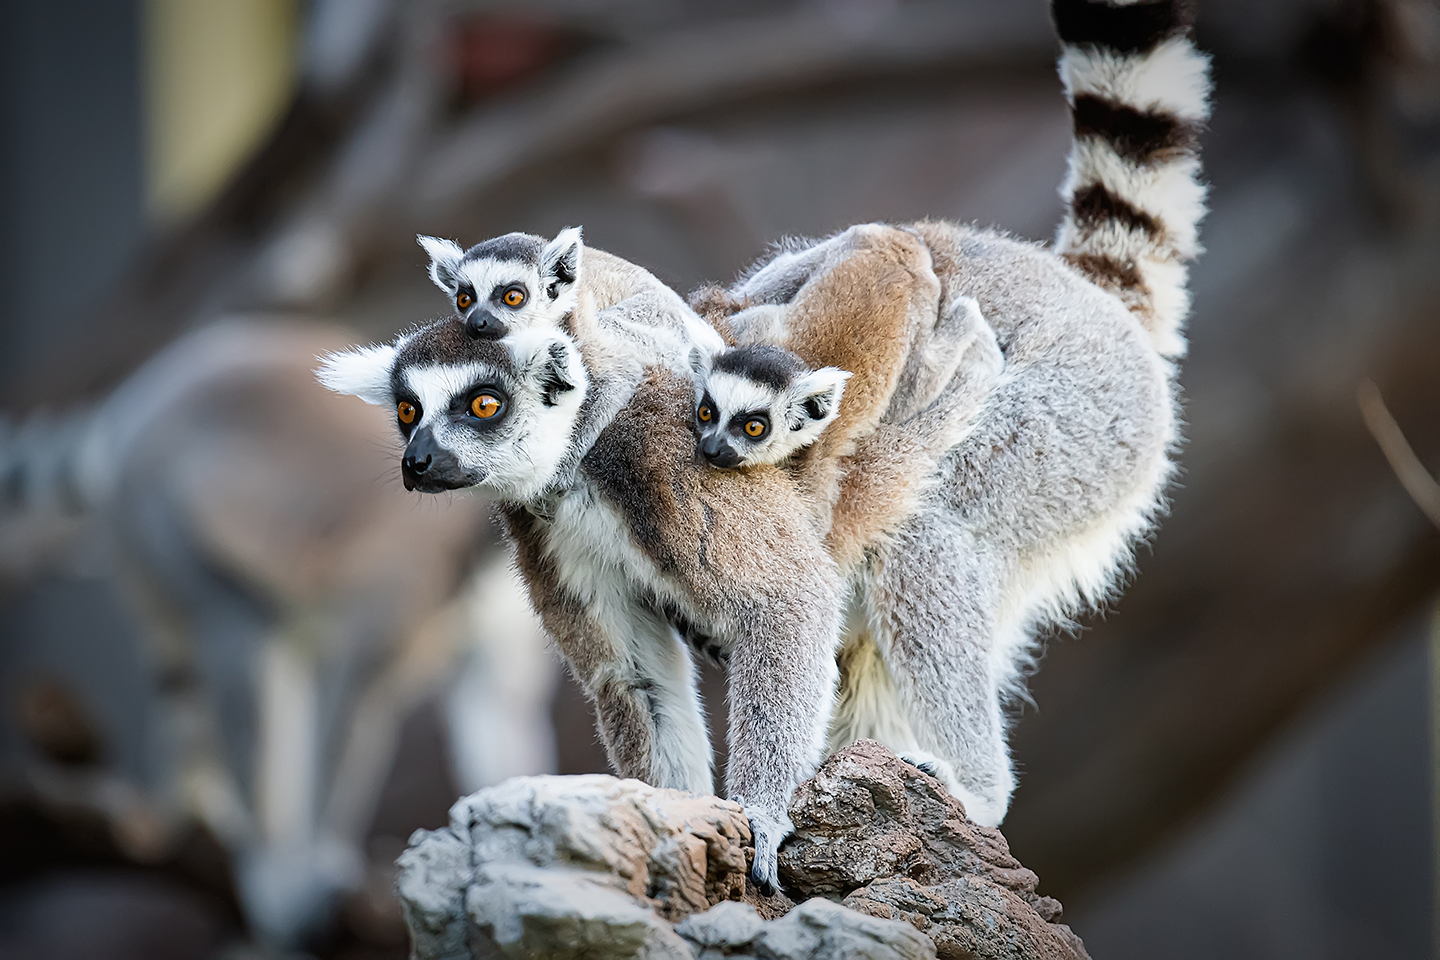 File:Ring-tailed lemur 1.png - Wikimedia Commons